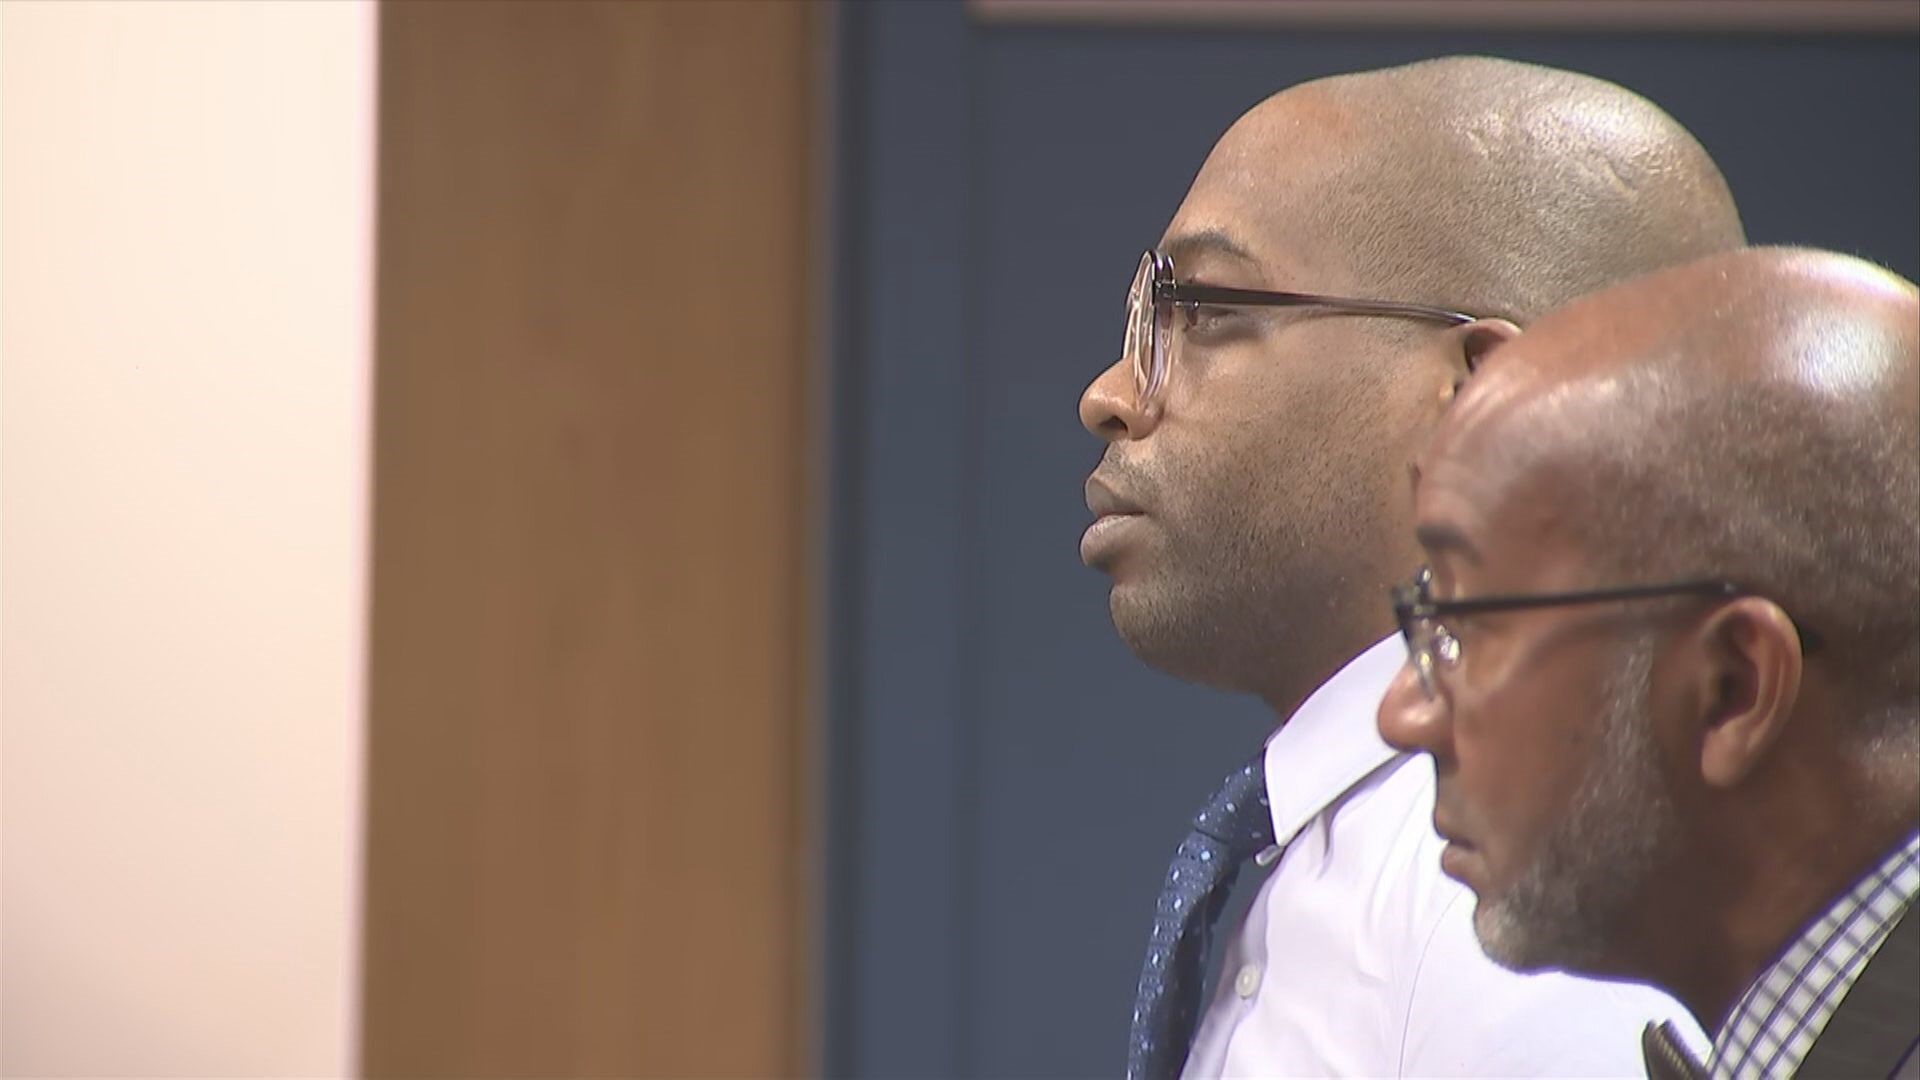 Robert Bivines was found guilty of malice murder in the shooting death of a customer in Buckhead.